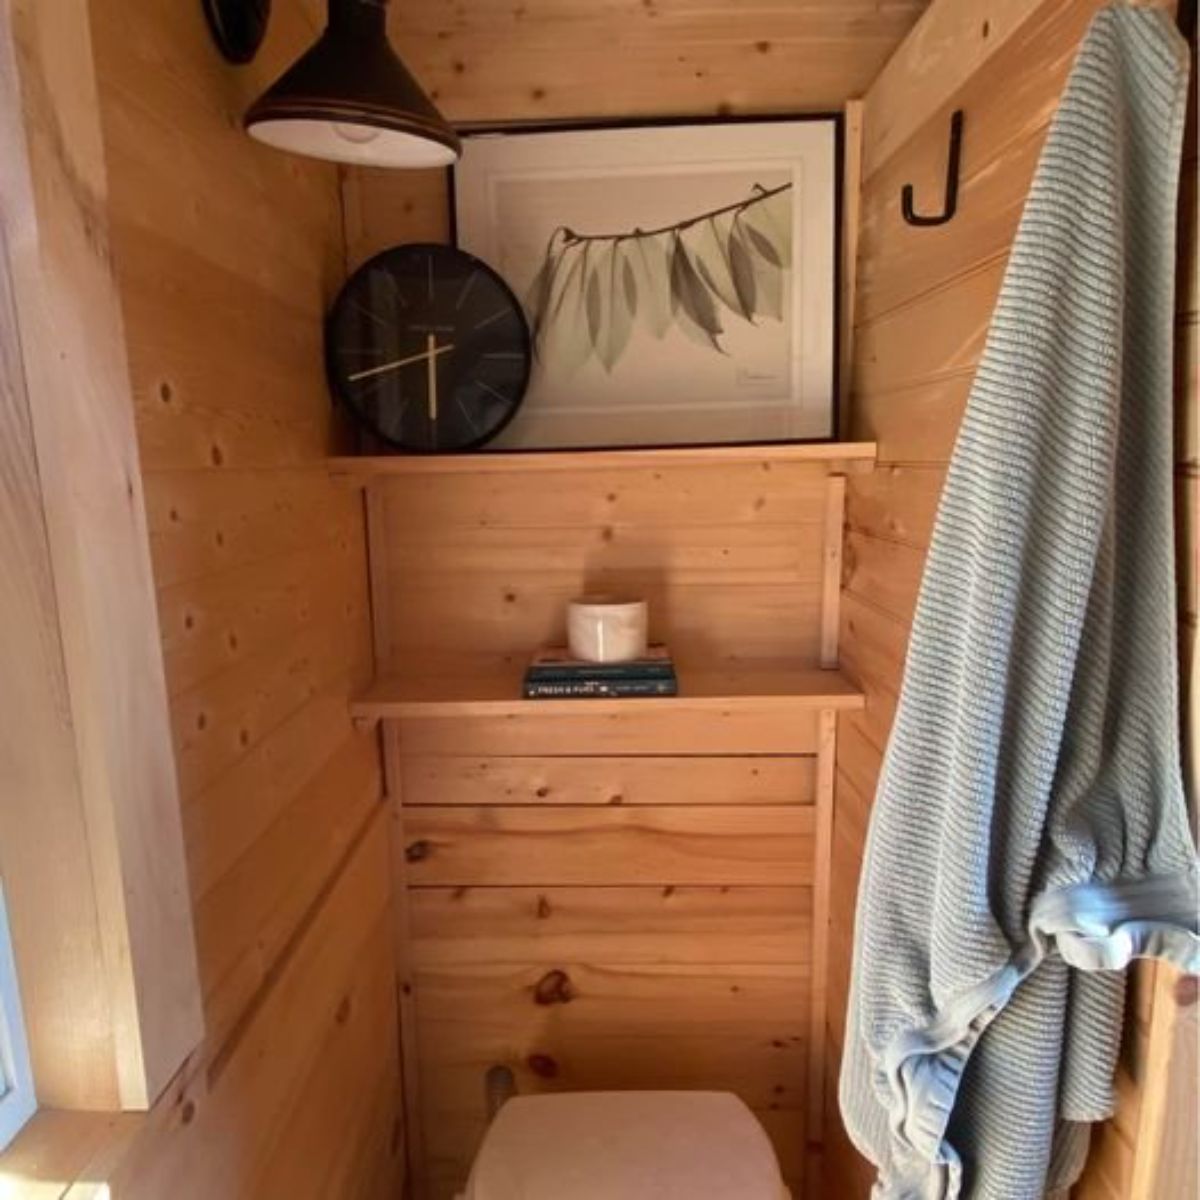 composting toilet with open shelves is installed in bathroom of spacious 2 bedroom tiny home